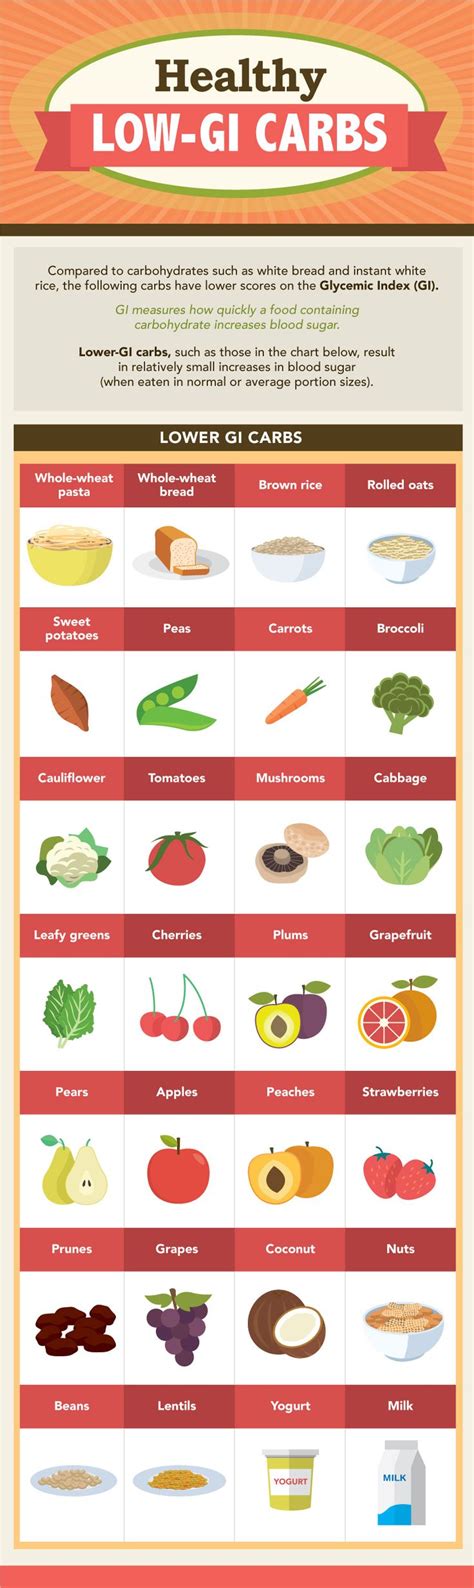 34 Best Low Glycemic Foods Images On Pinterest Healthy Eating